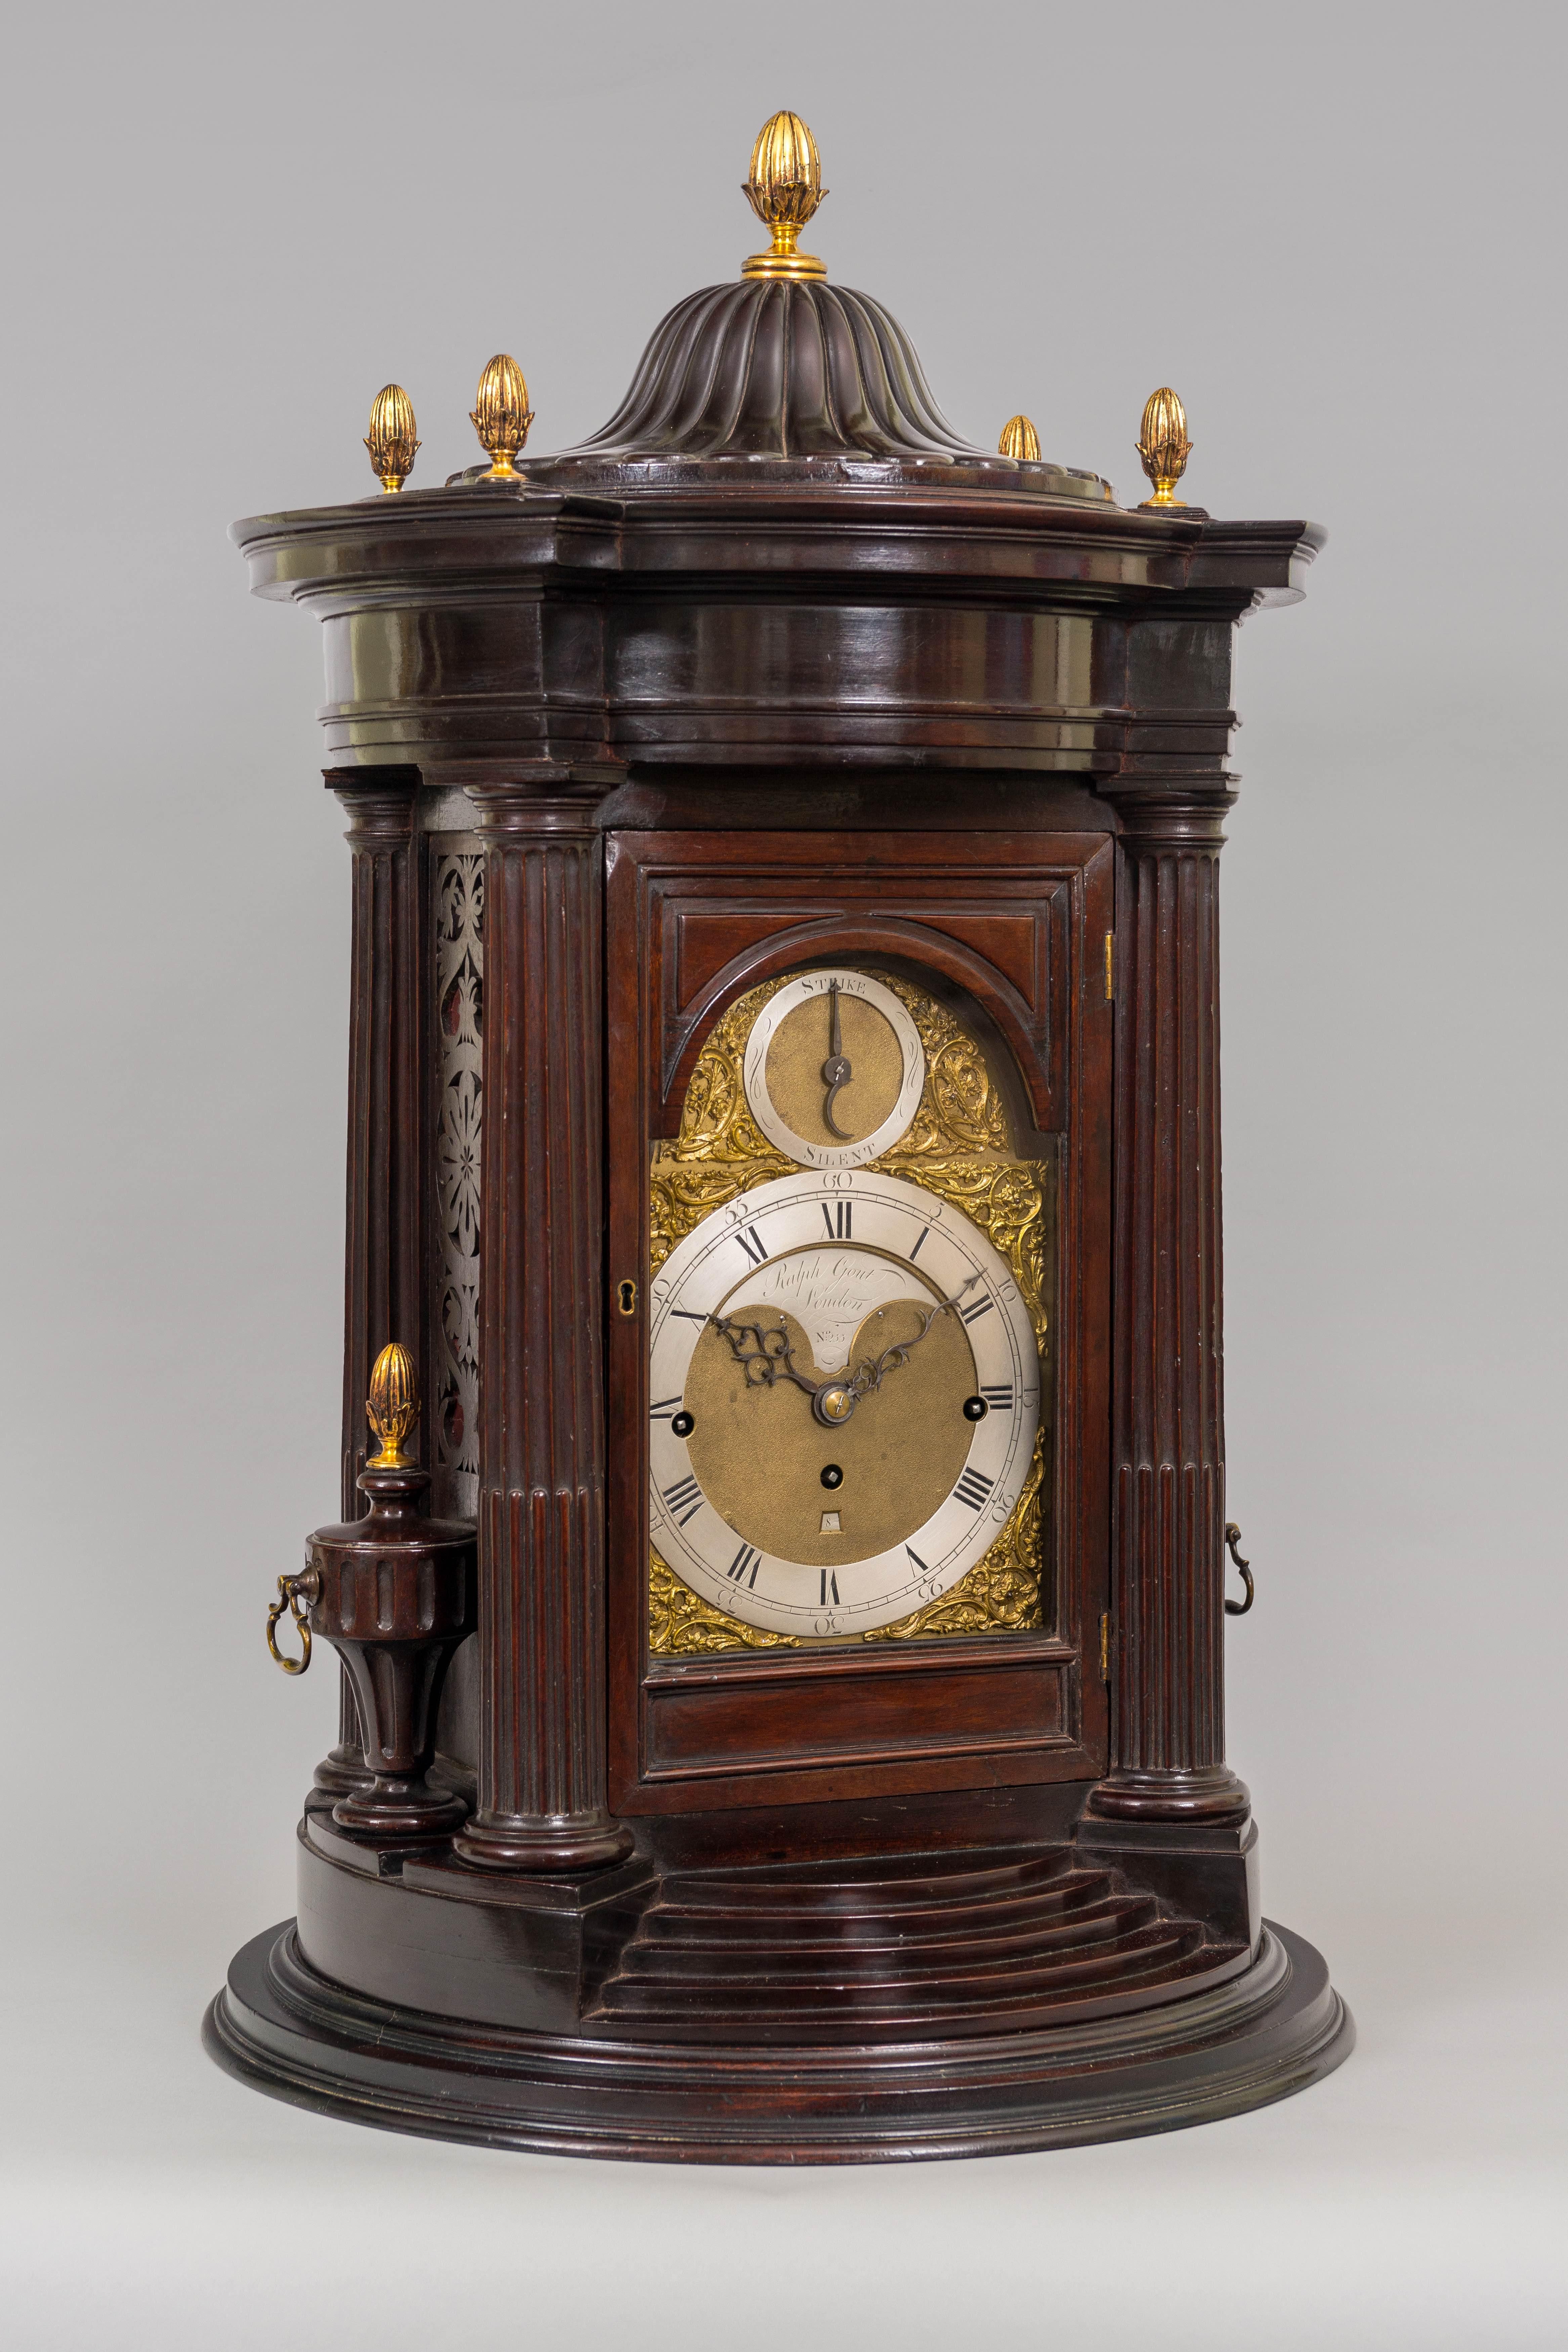 An impressive and unique 18th centur,y, GeorgeIII period antique circular mahogany musical table clock, in a case of neoclassical design by Ralph Gout of London.
 
The substantial mahogany case has four fluted and capped columns with matching side